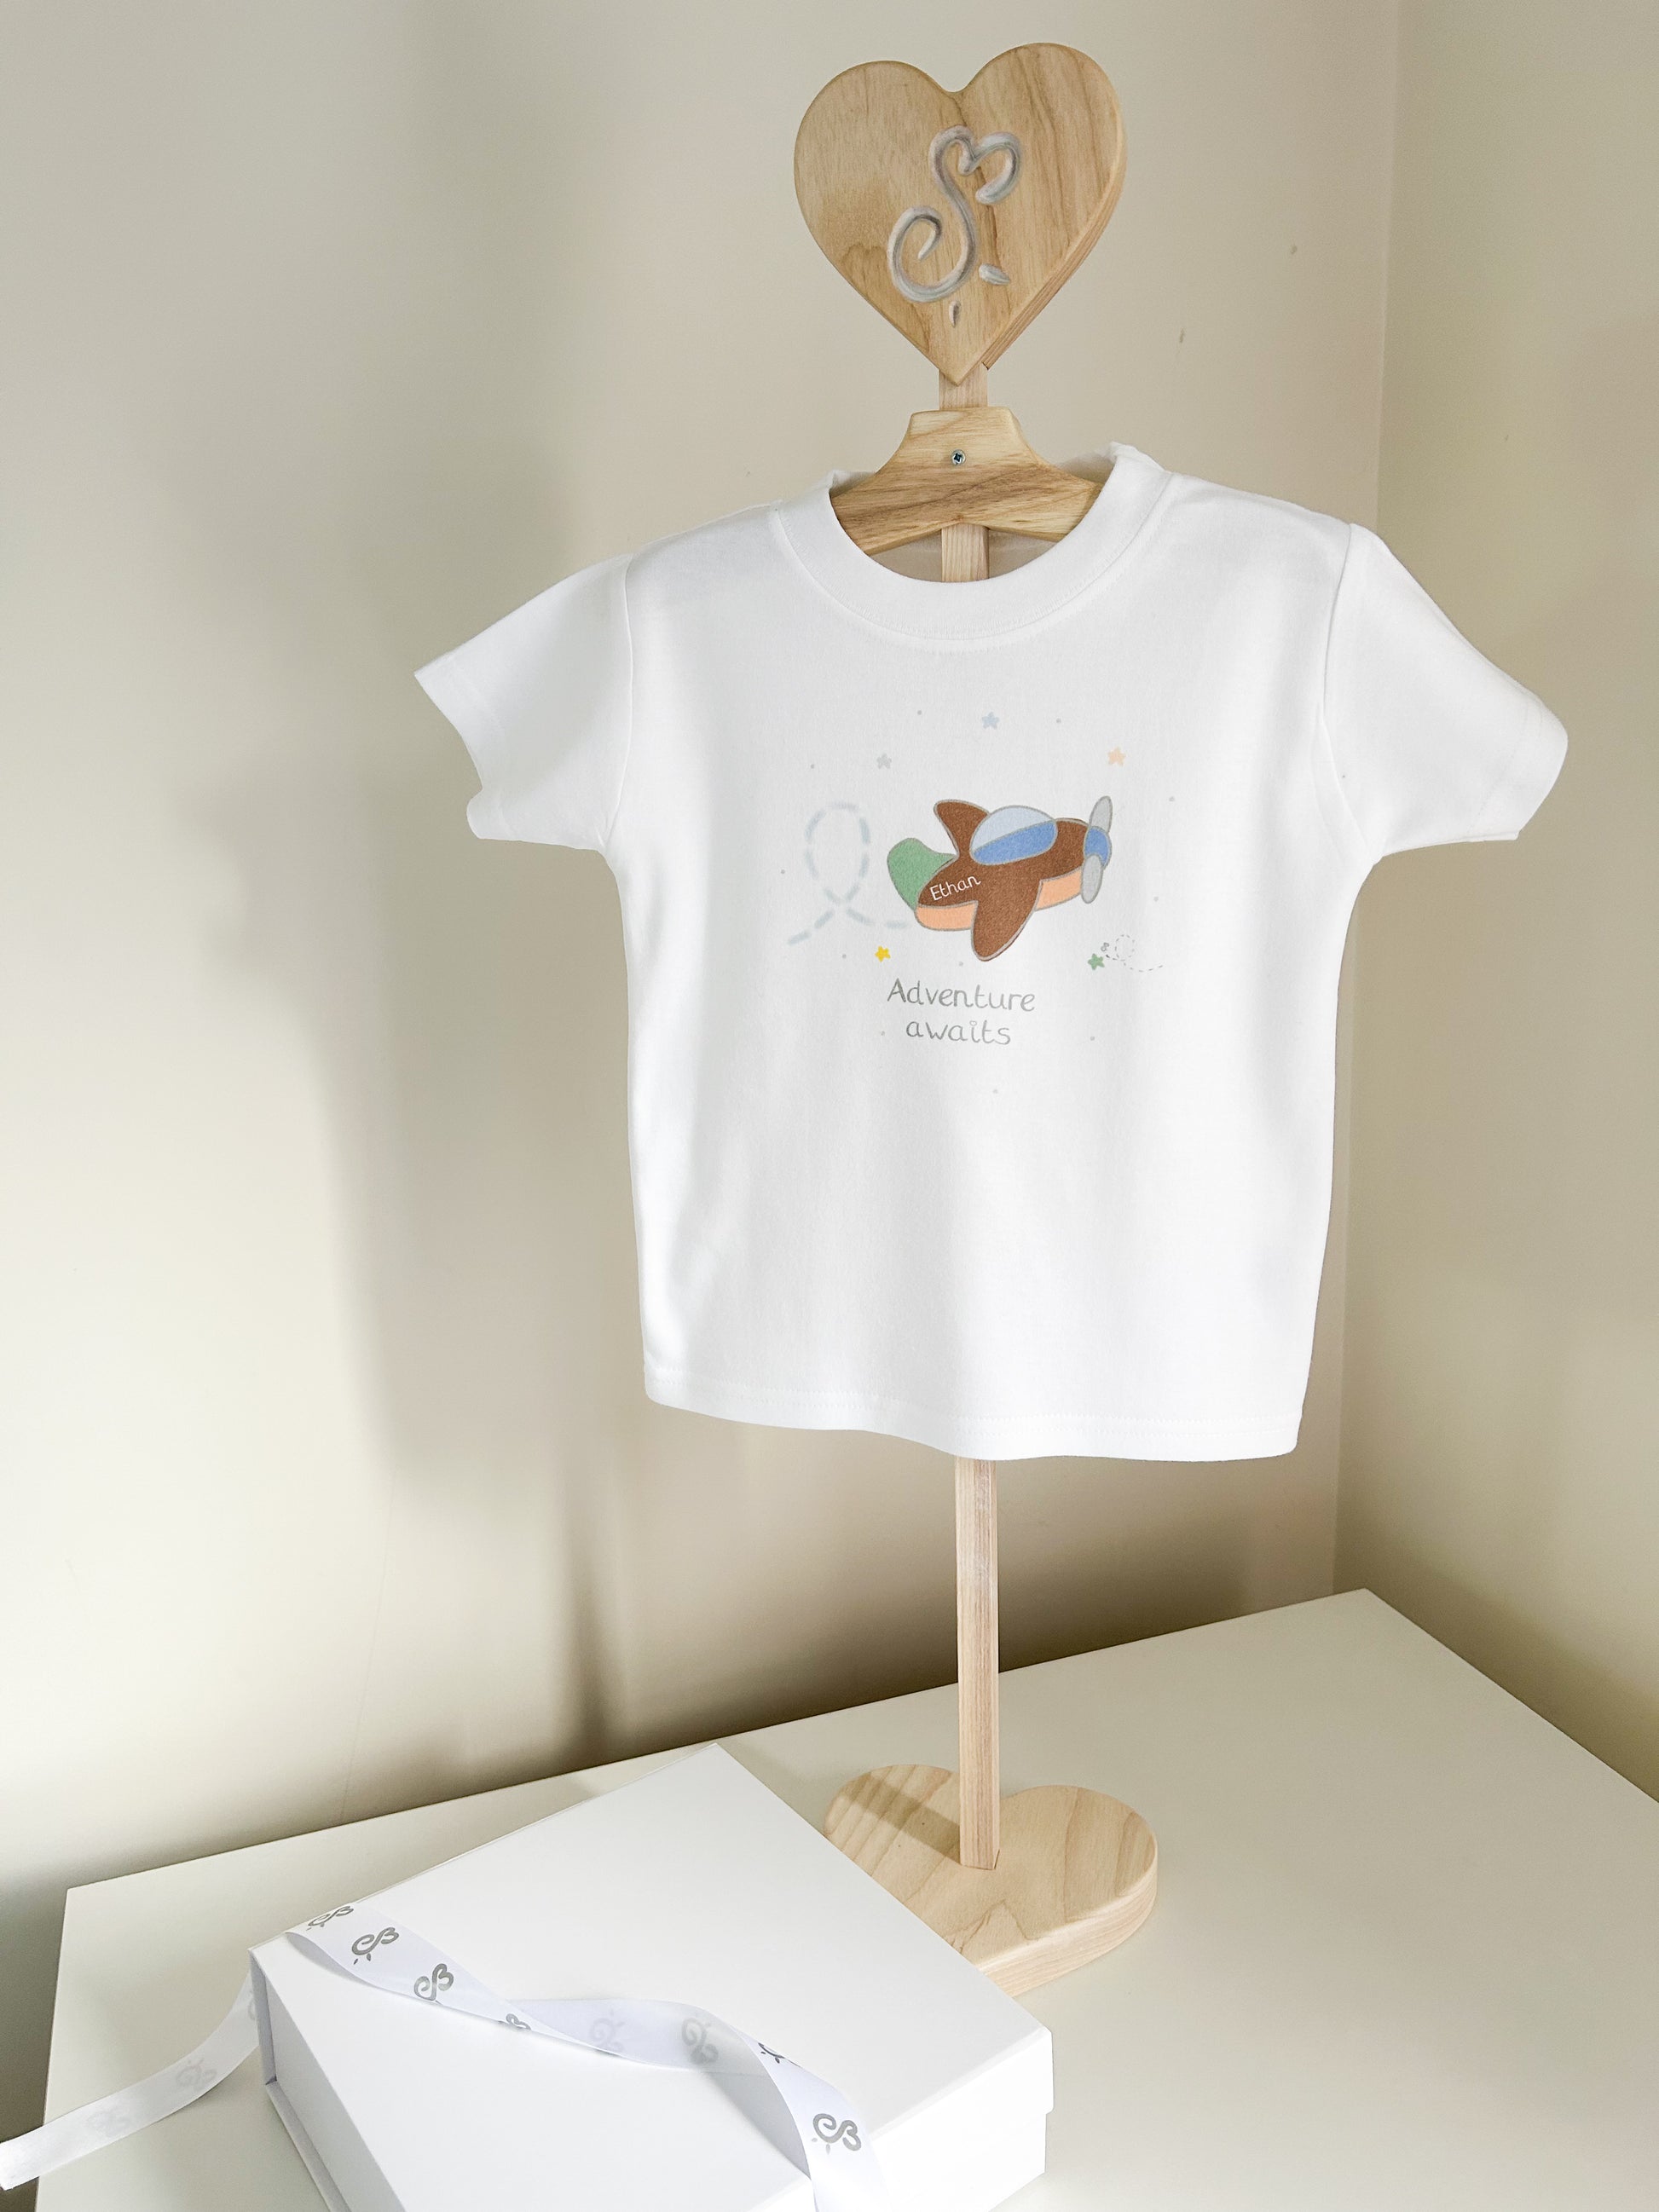 100% cotton first holiday t-shirt and sweatshirt for children with aeroplane design and personalised name tag